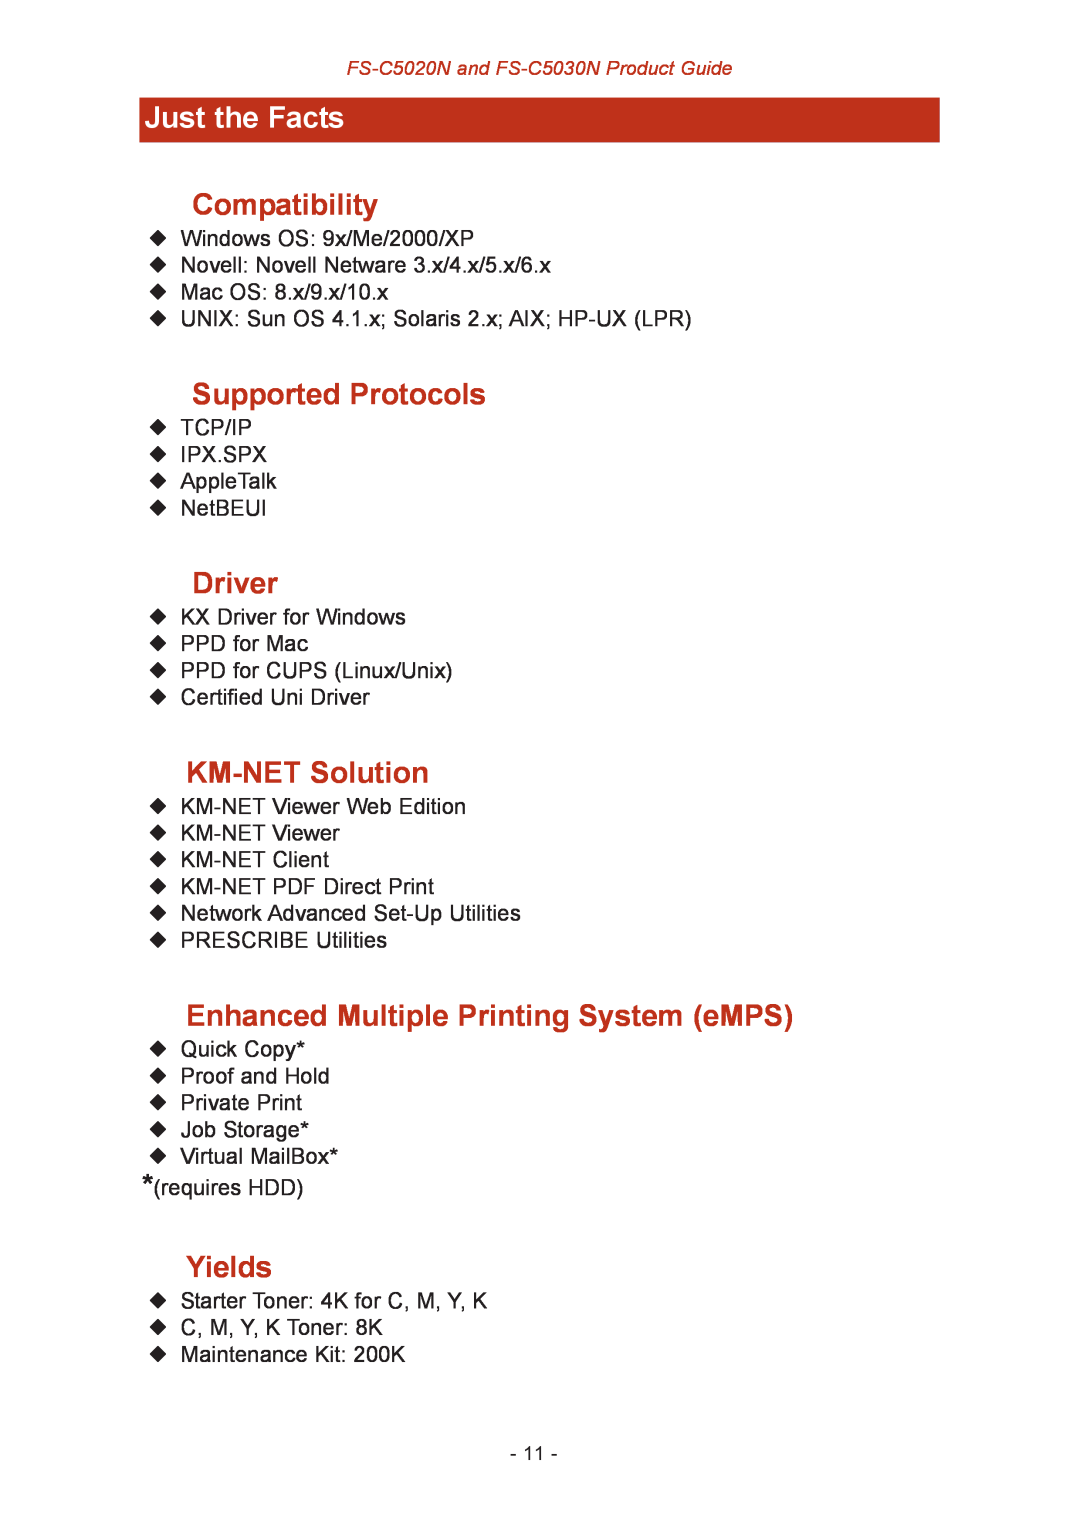 Kyocera FS-C5030N Compatibility, Supported Protocols, Driver, KM-NET Solution, Enhanced Multiple Printing System eMPS 